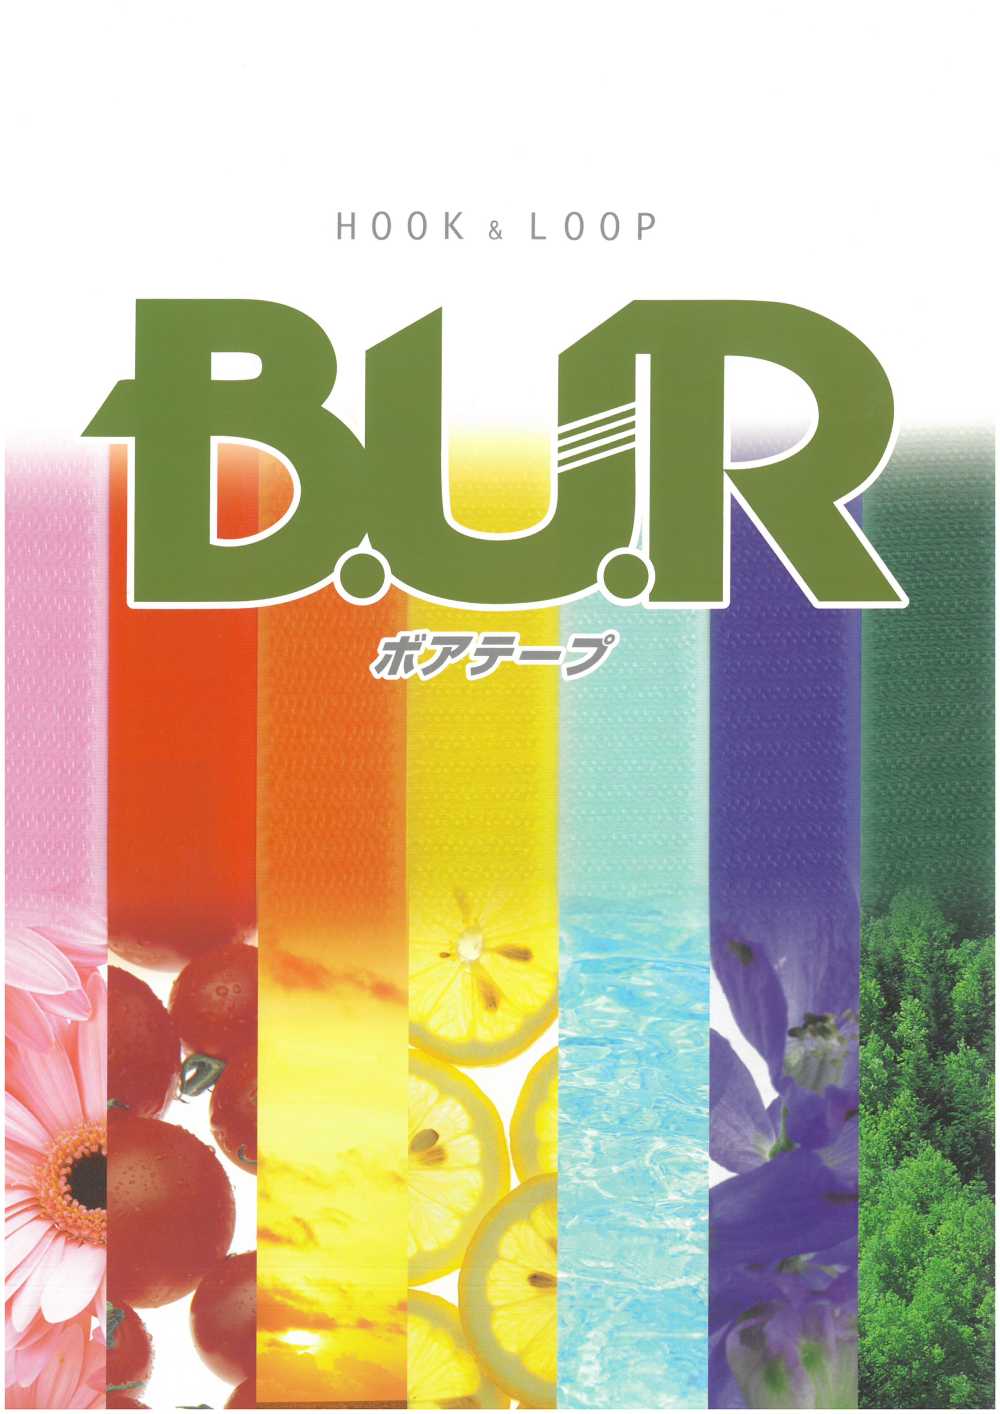 RBL Boa Tape Hook And Loop B Side (Loop Type) Made Of Nylon With Rubber Adhesive Type[Zipper] B.U.R.